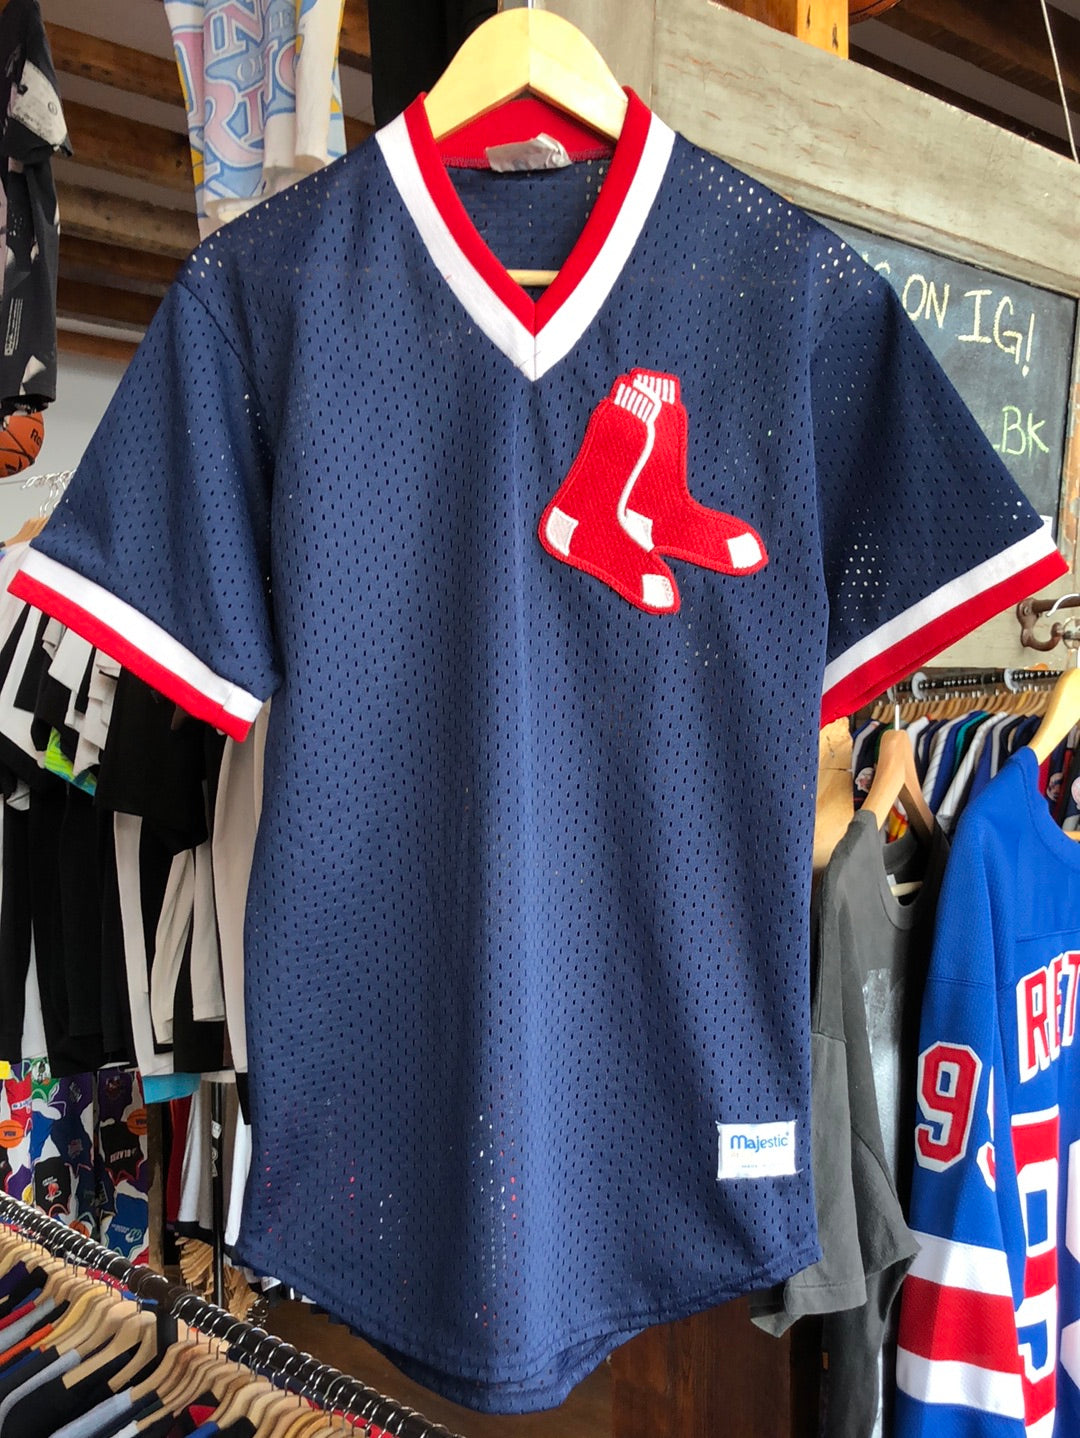 red sox mesh jersey